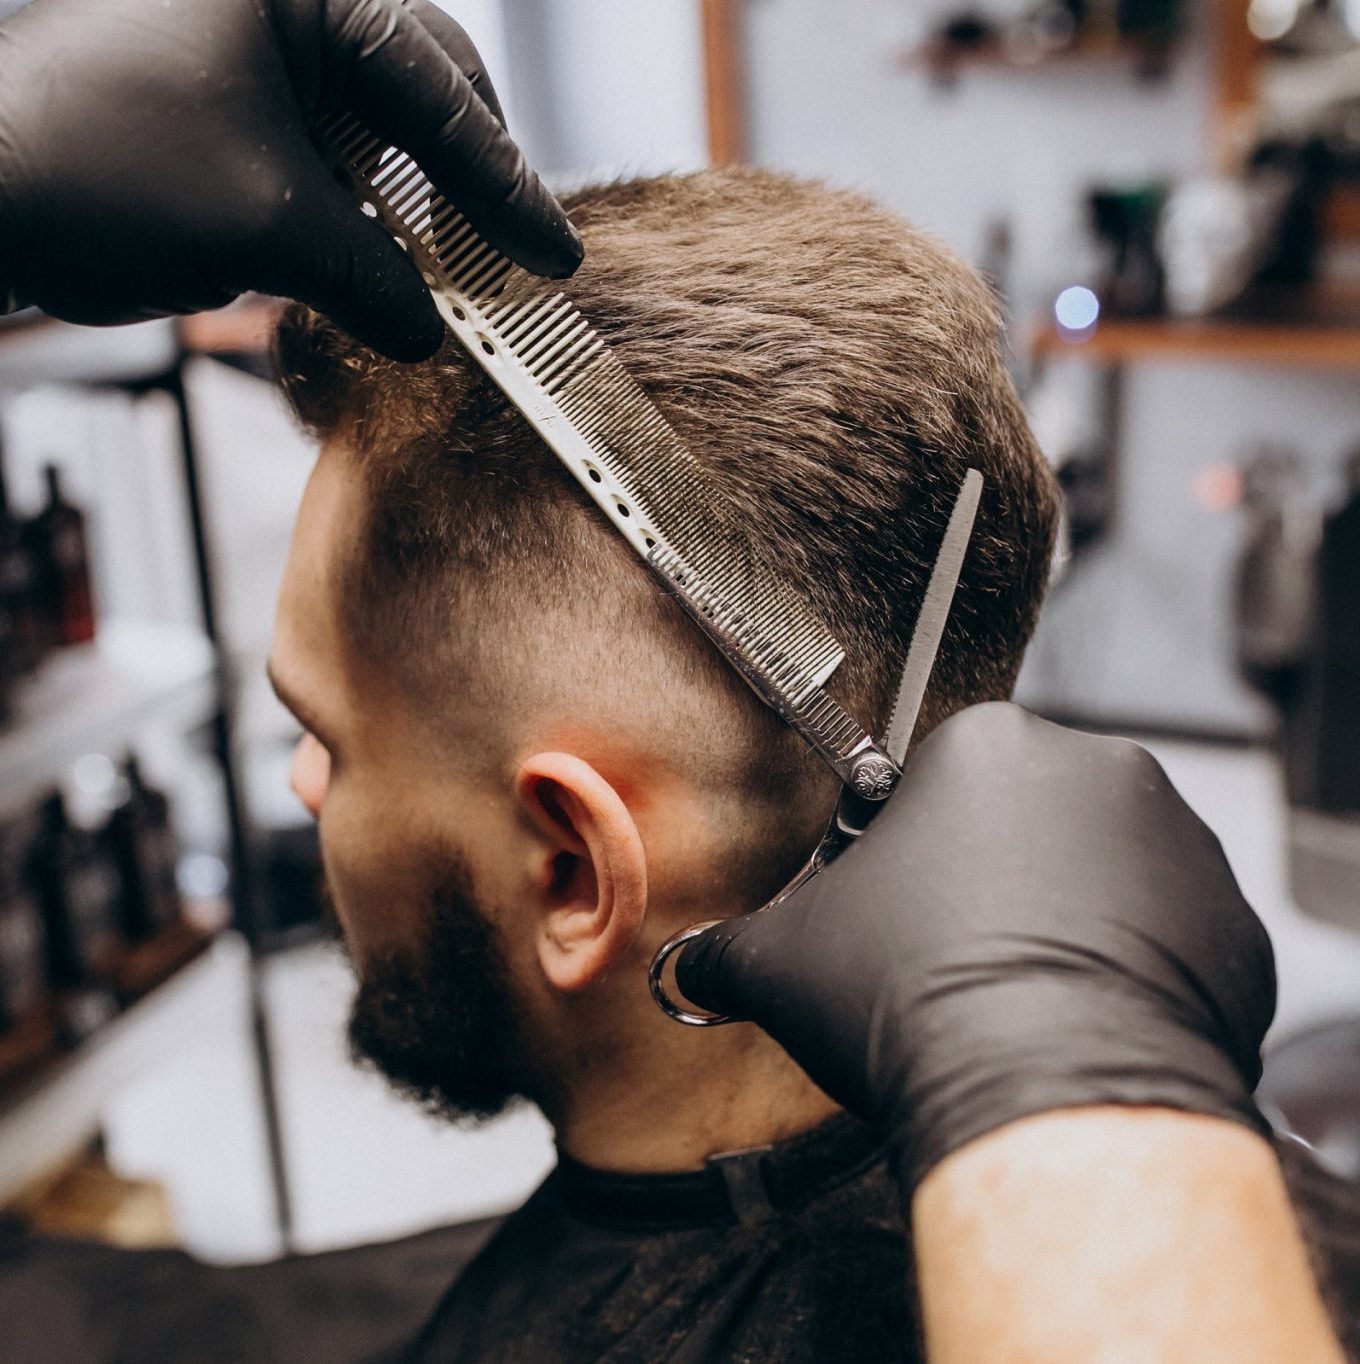 Taking on a new look at a barbershop